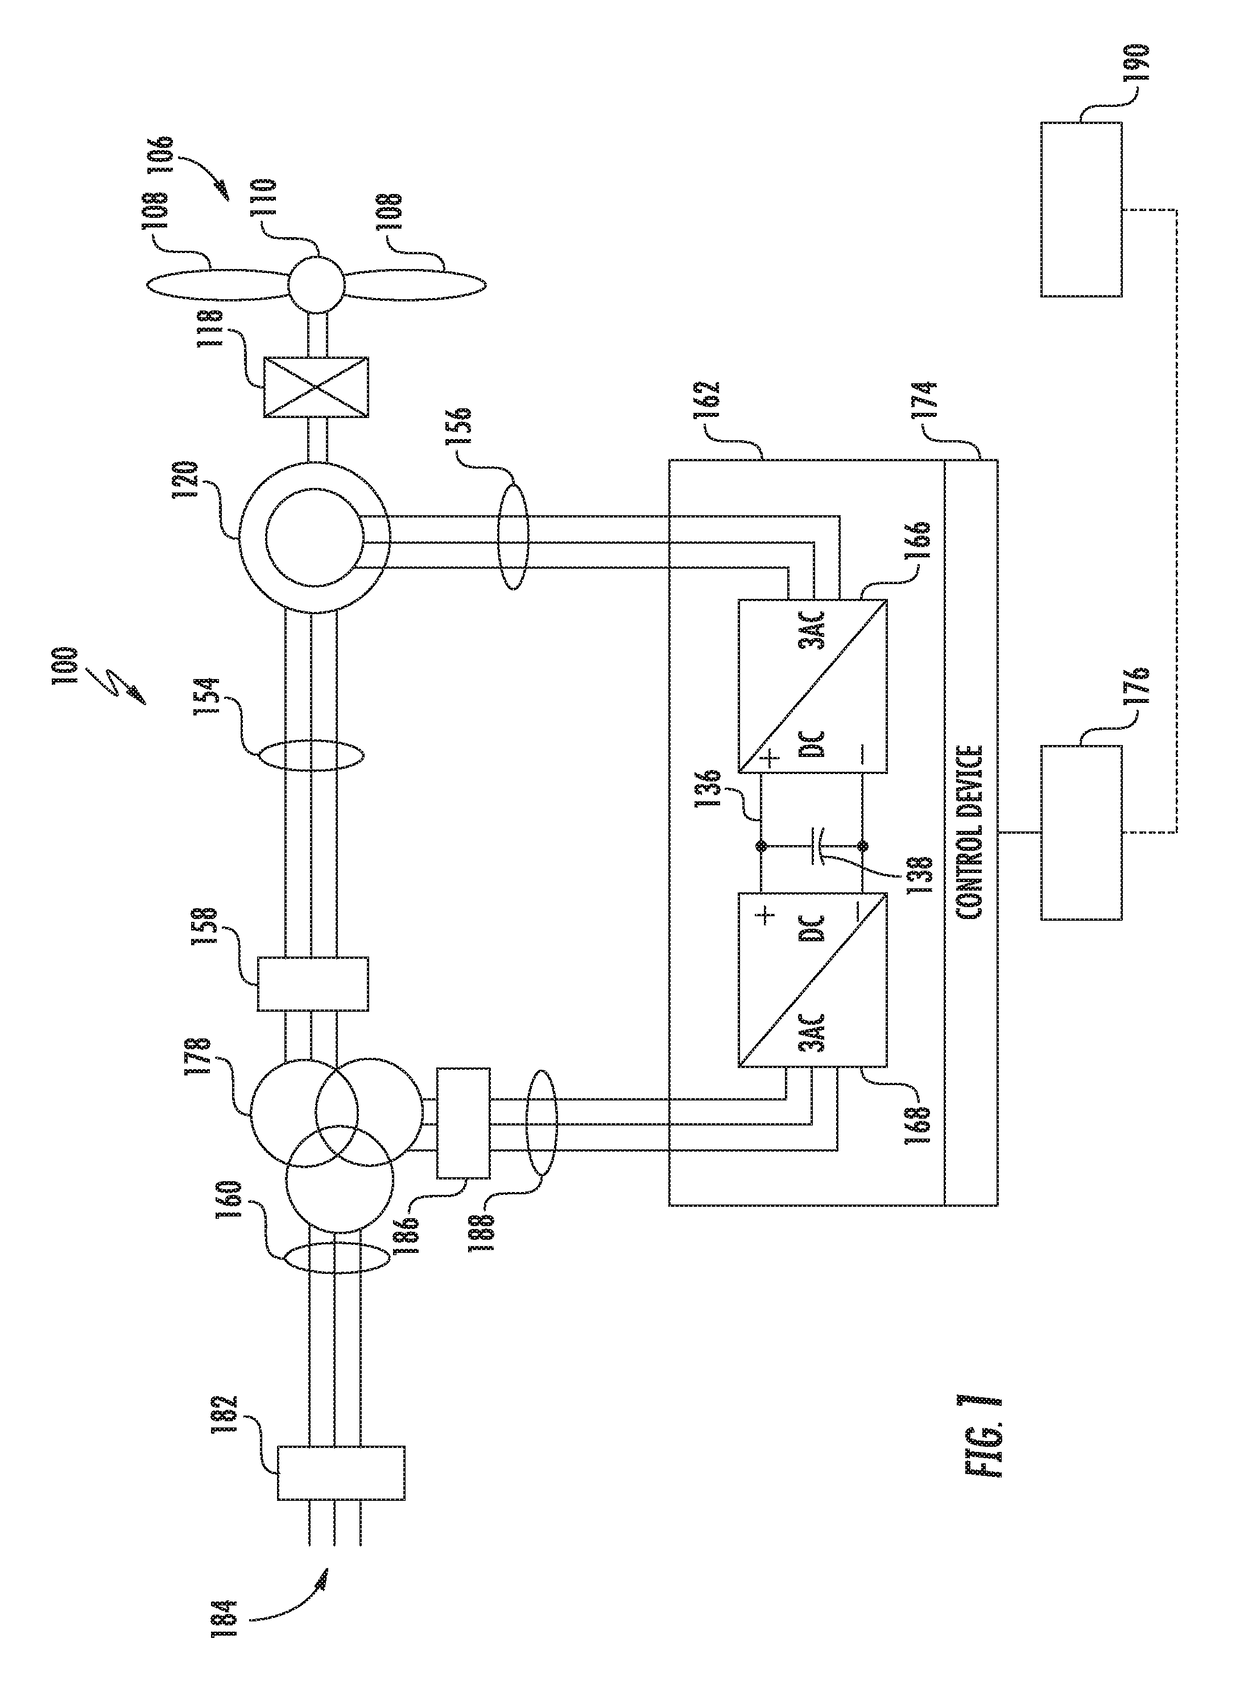 Allocating Reactive Power Production for Doubly Fed Induction Generator Wind Turbine System